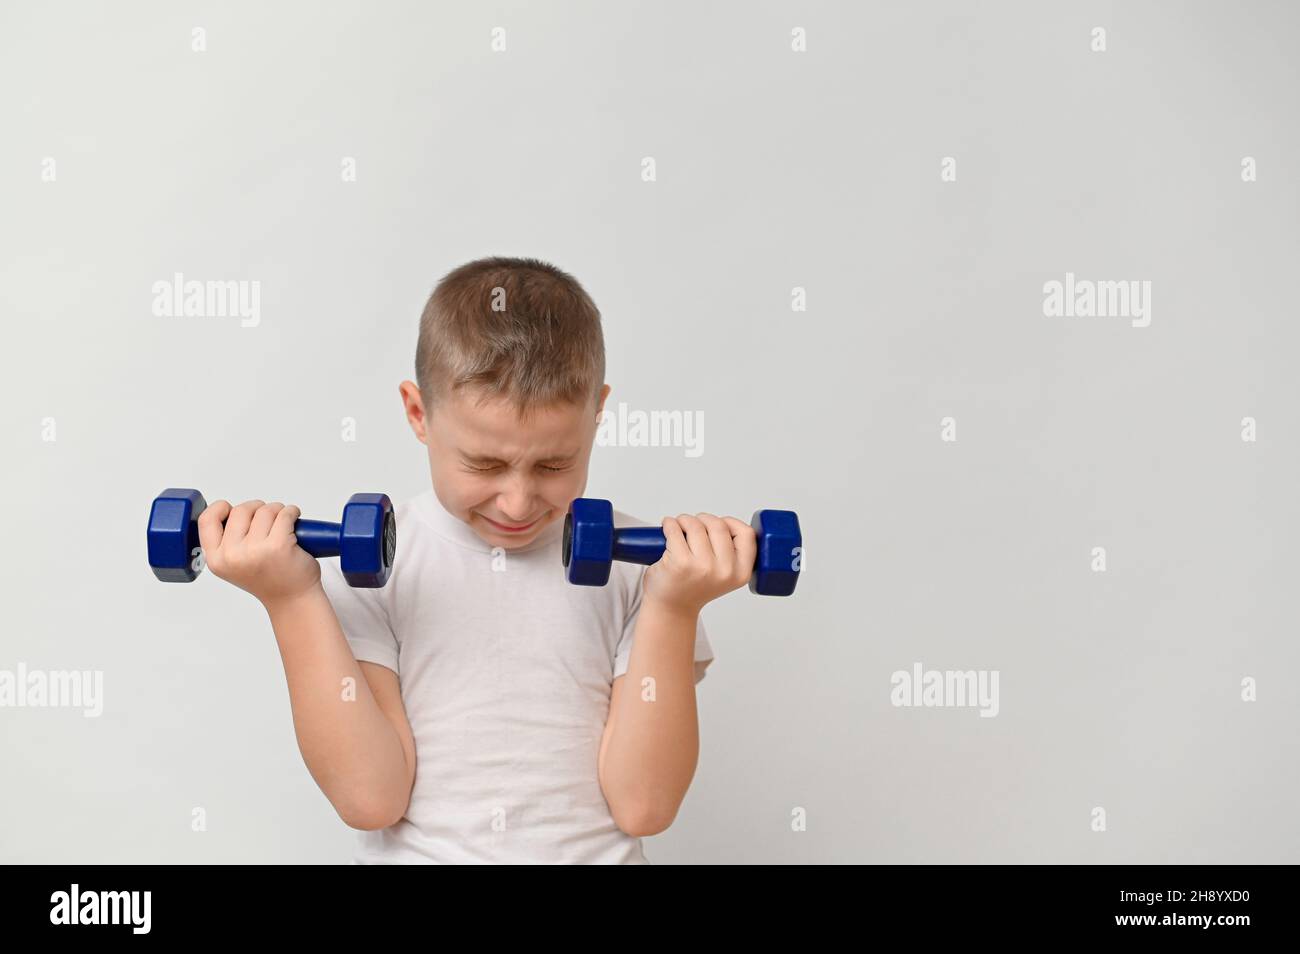 a boy 8-10 years old with dumbbells on a white background. mock up Stock Photo